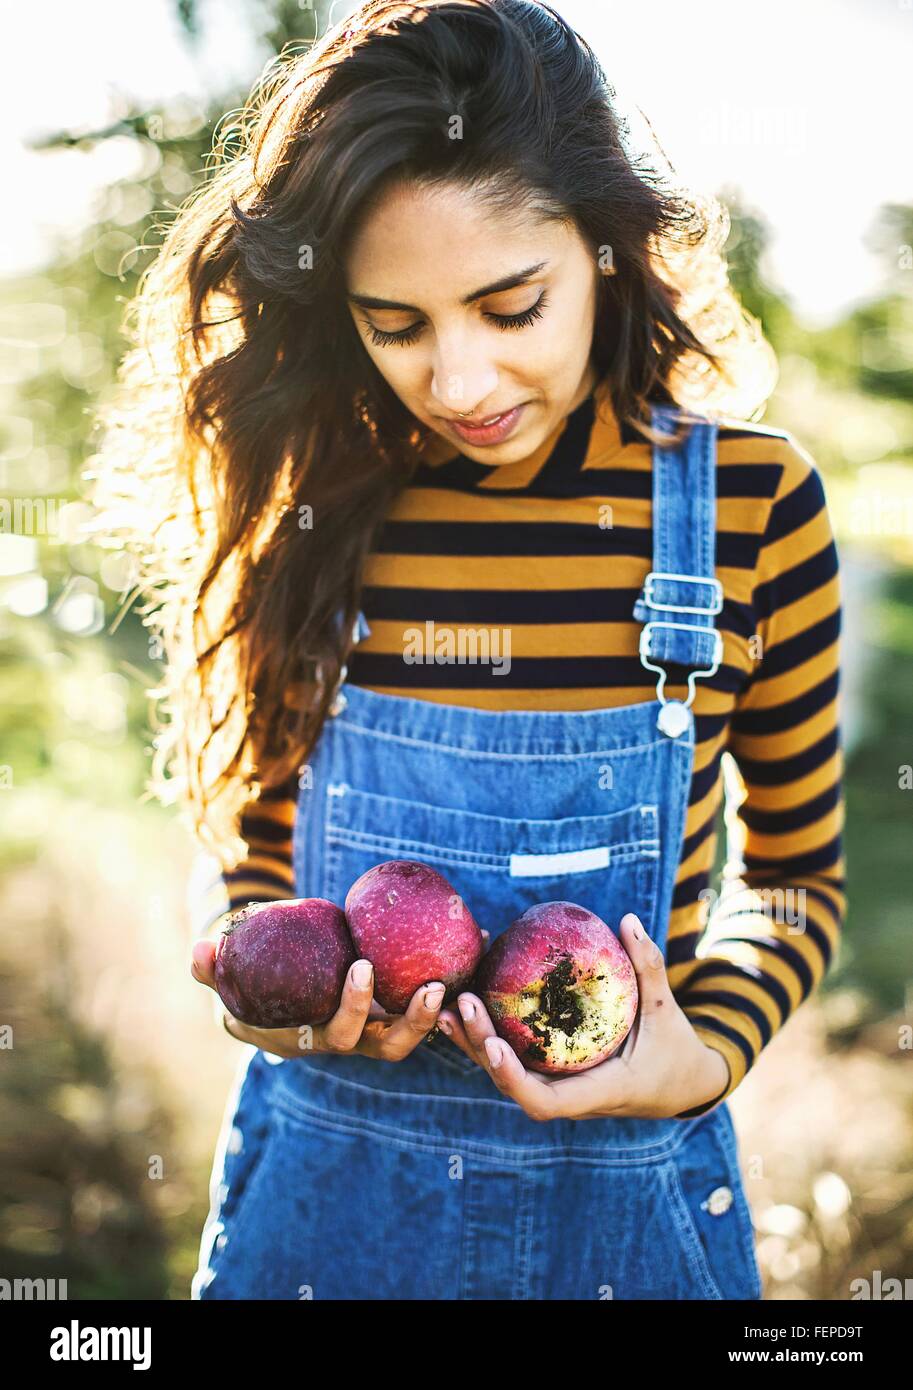 Young woman, in rural environment, holding apples Stock Photo